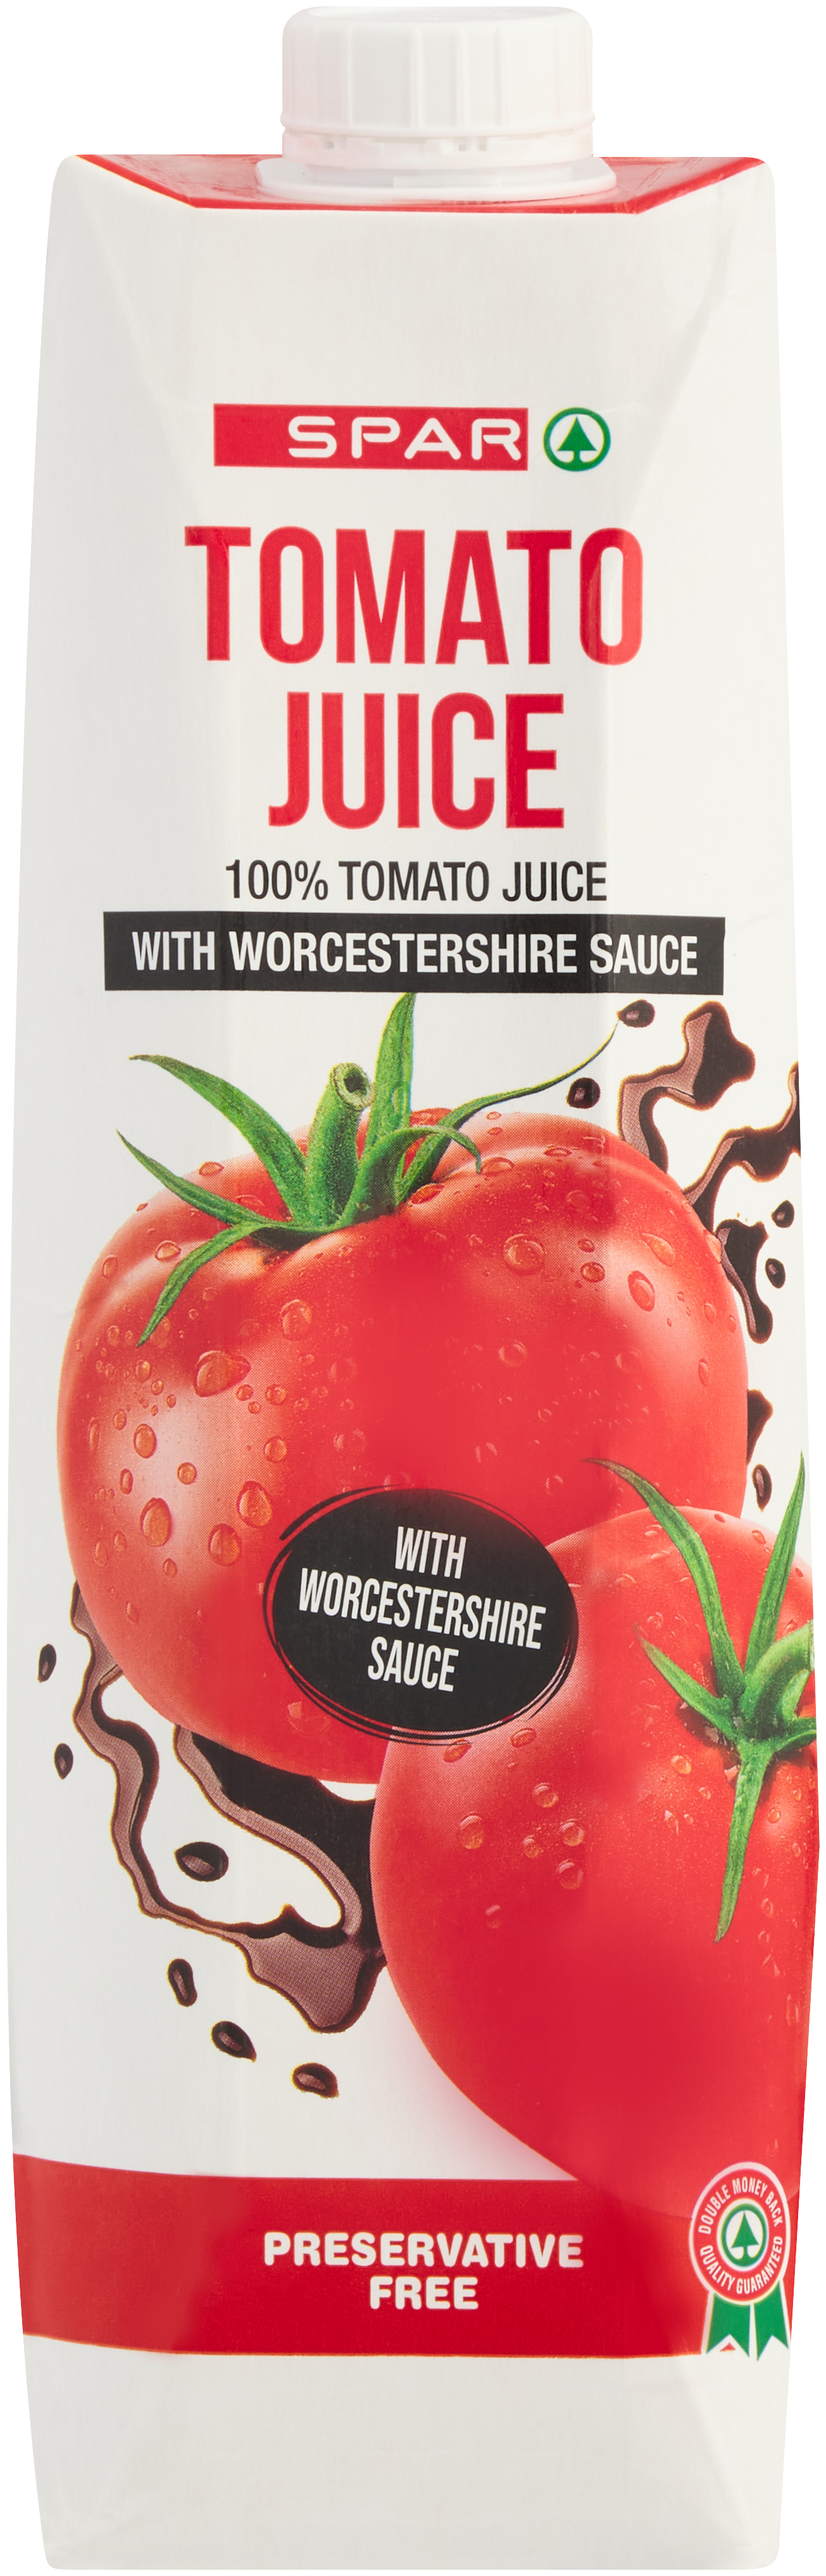 100% tomato juice with worcestershire sauce  